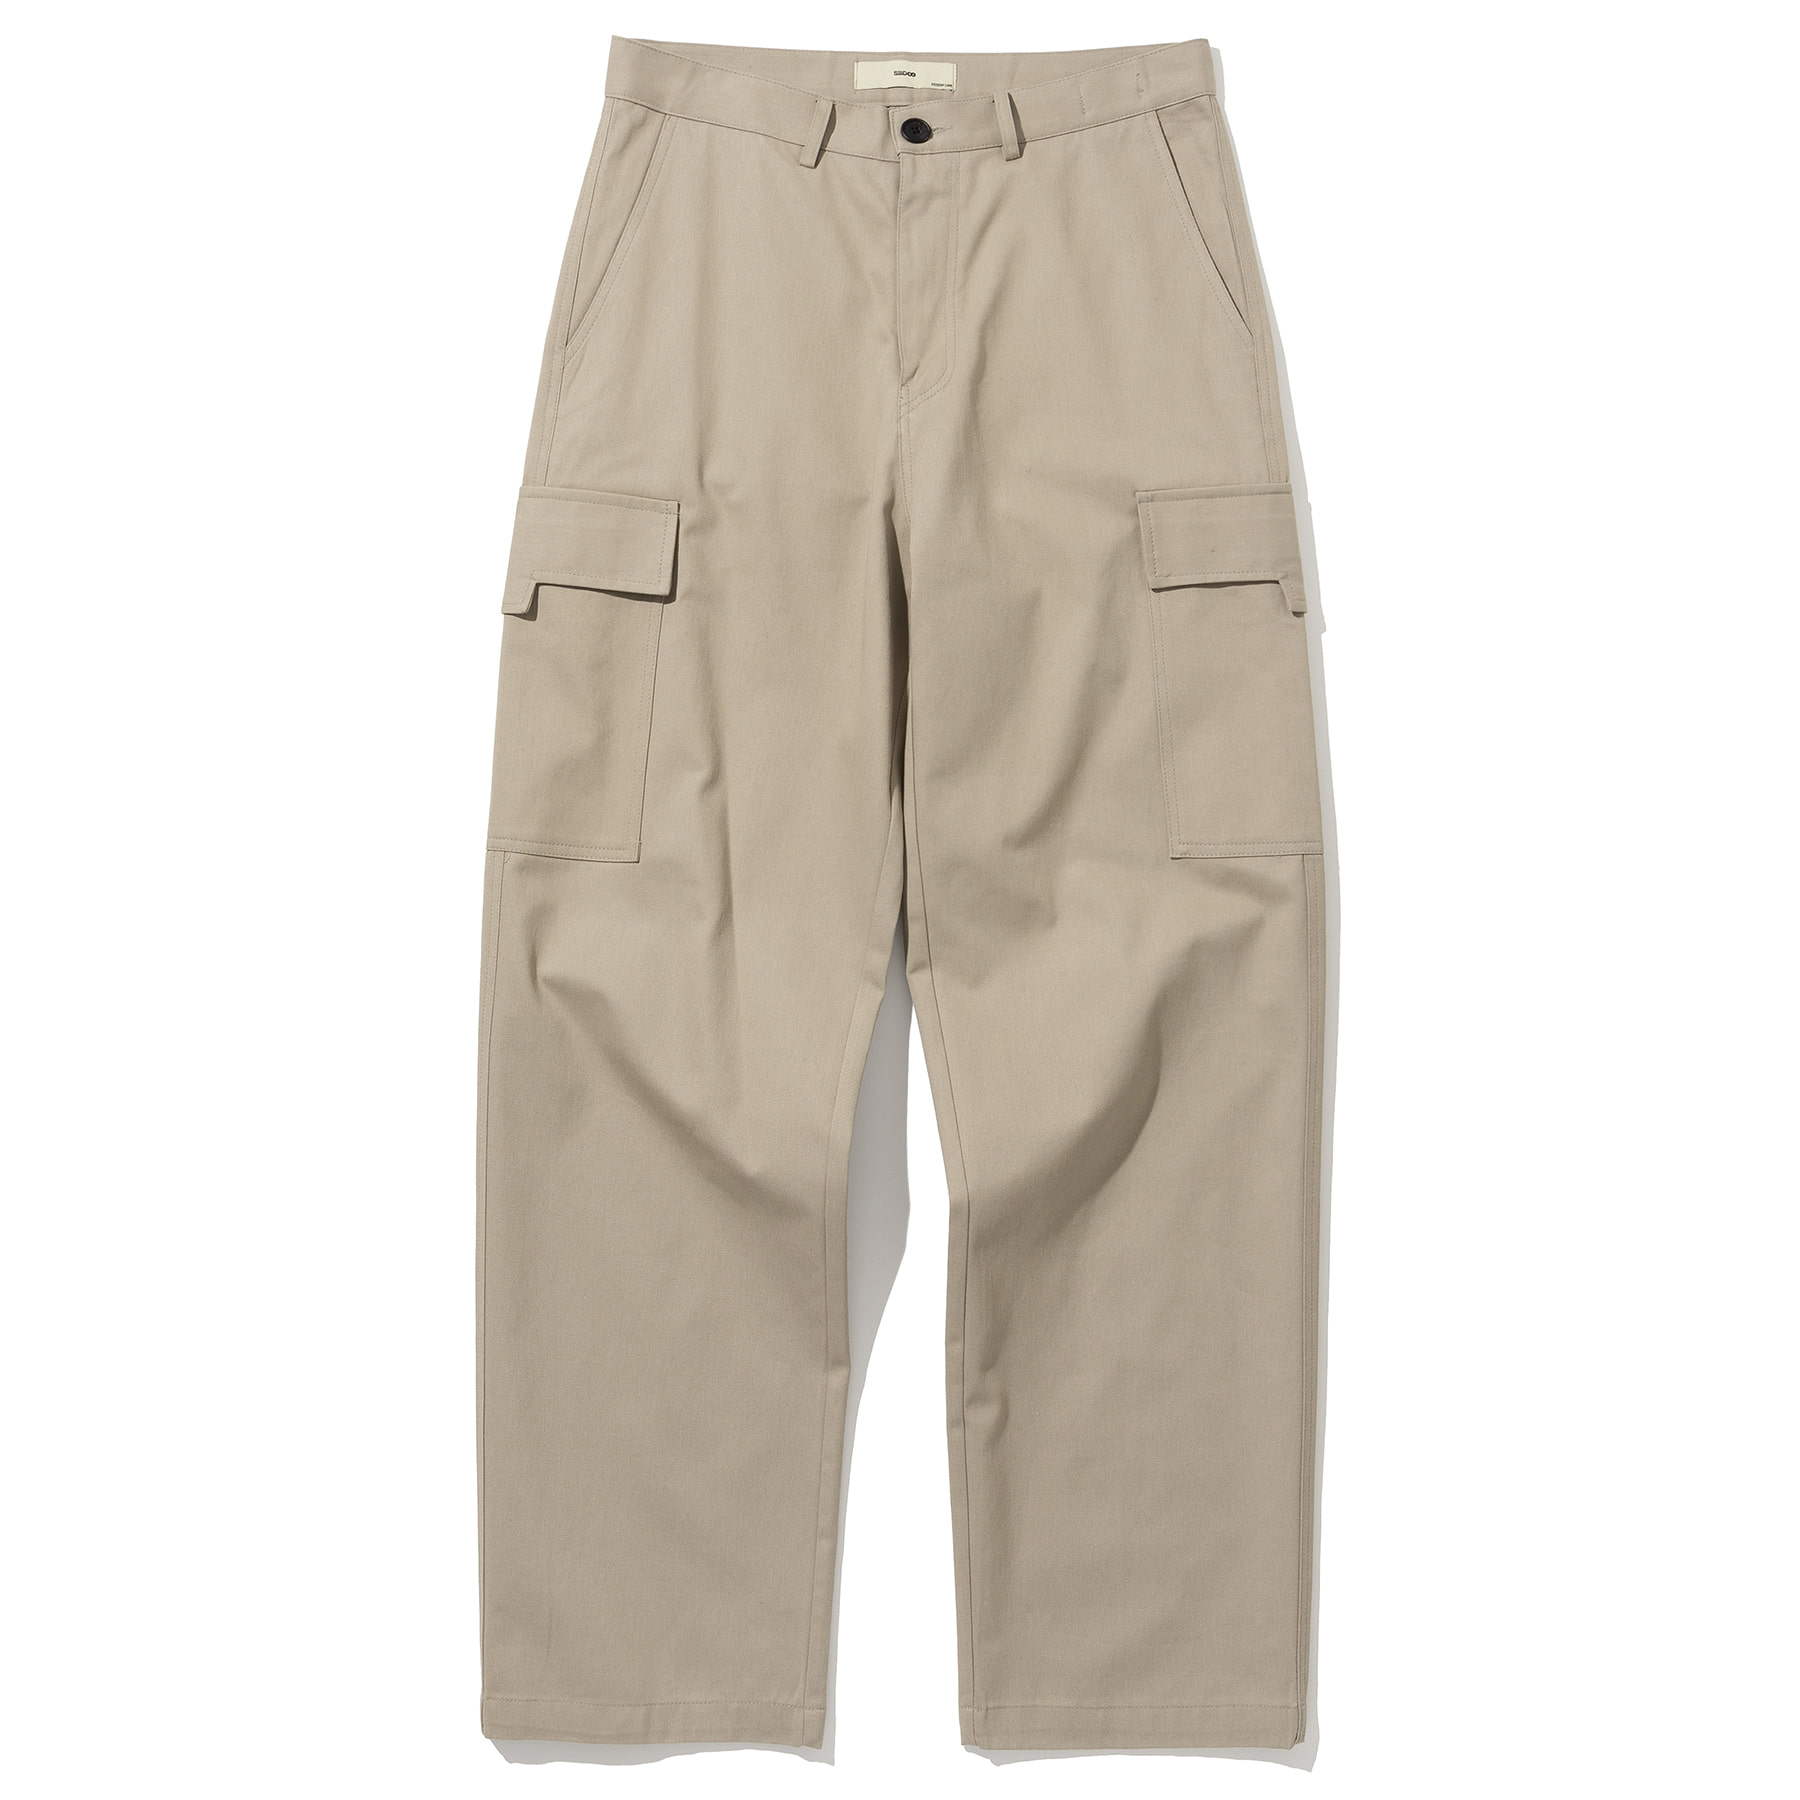 [OWN PROJECT] SOLID COTTON MODIFY CARGO POCKET PANTS #1